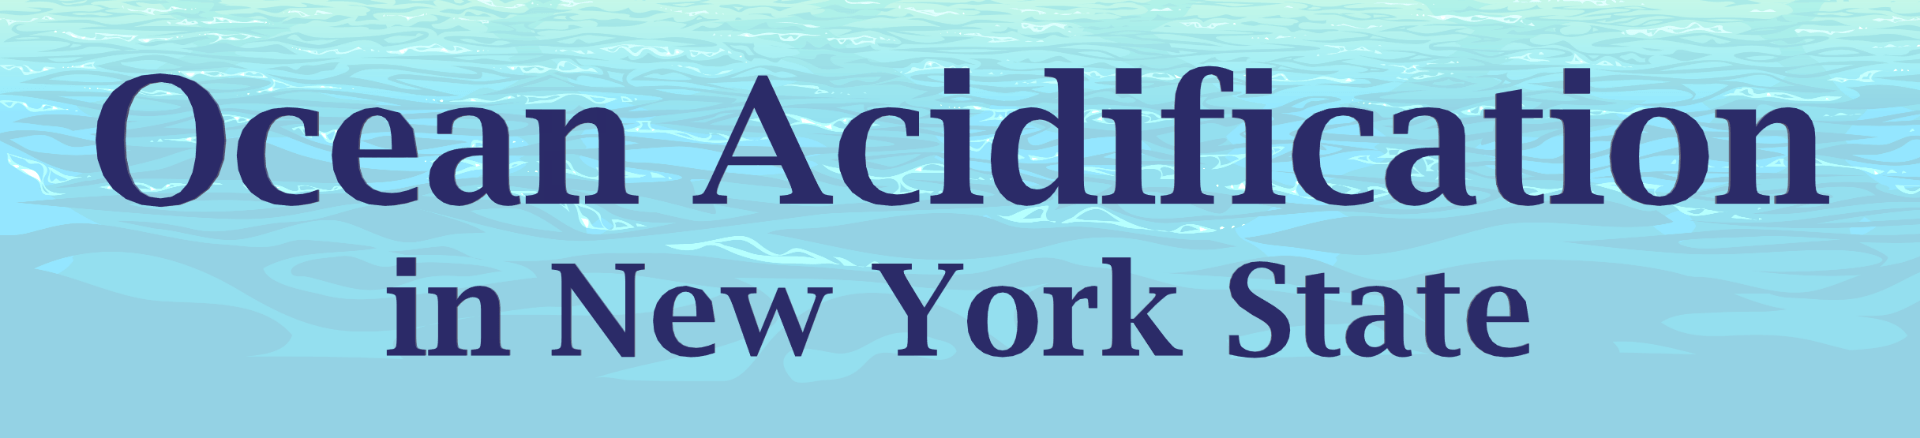 Ocean Acidification in New York State